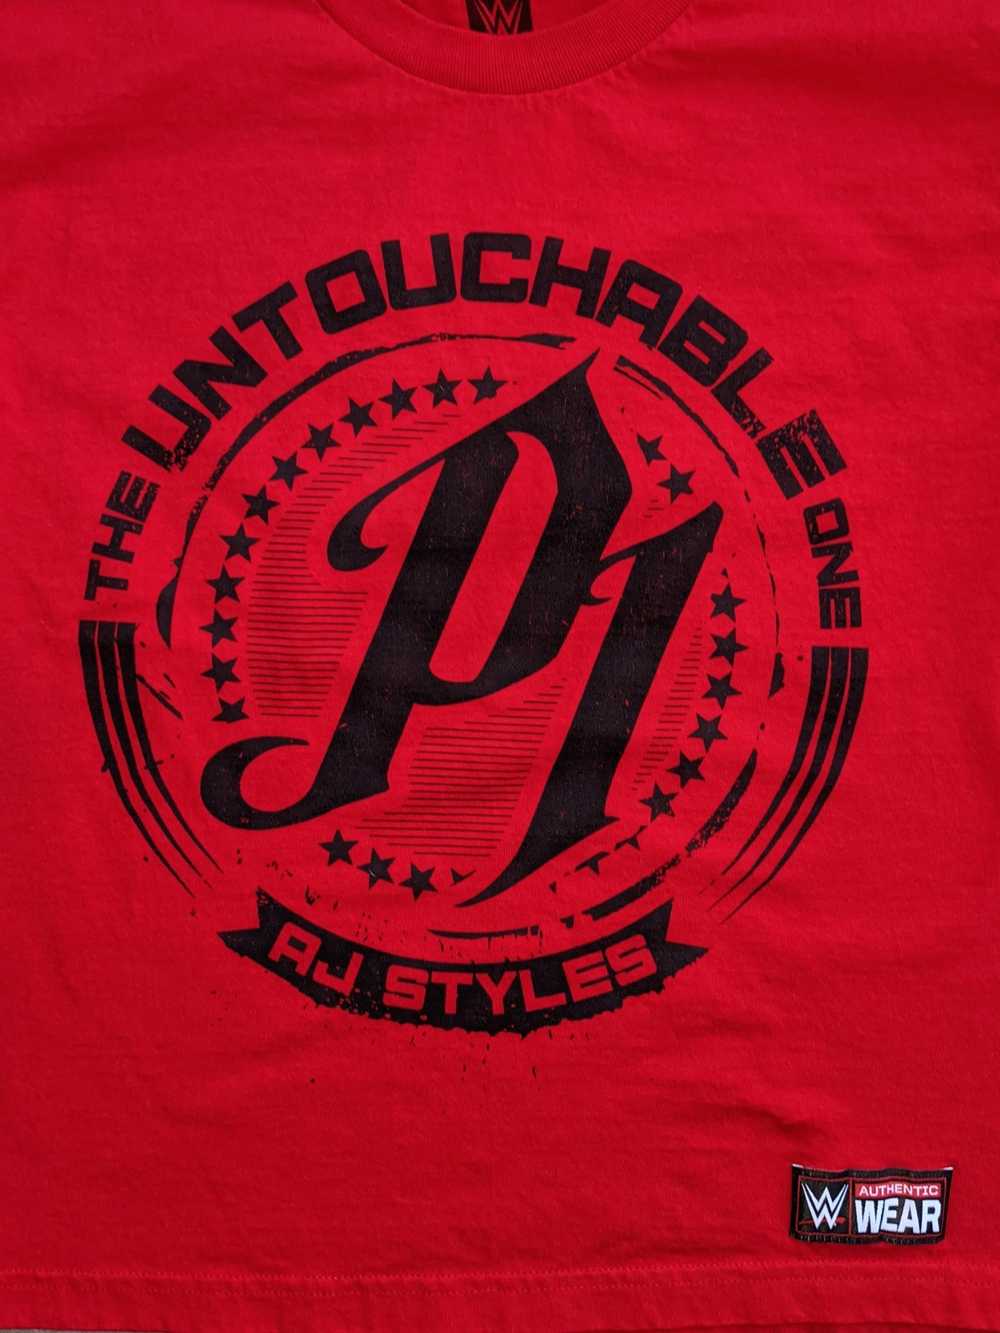 Wwe WWE The Untouchable One AJ Styles t-shirt - image 2